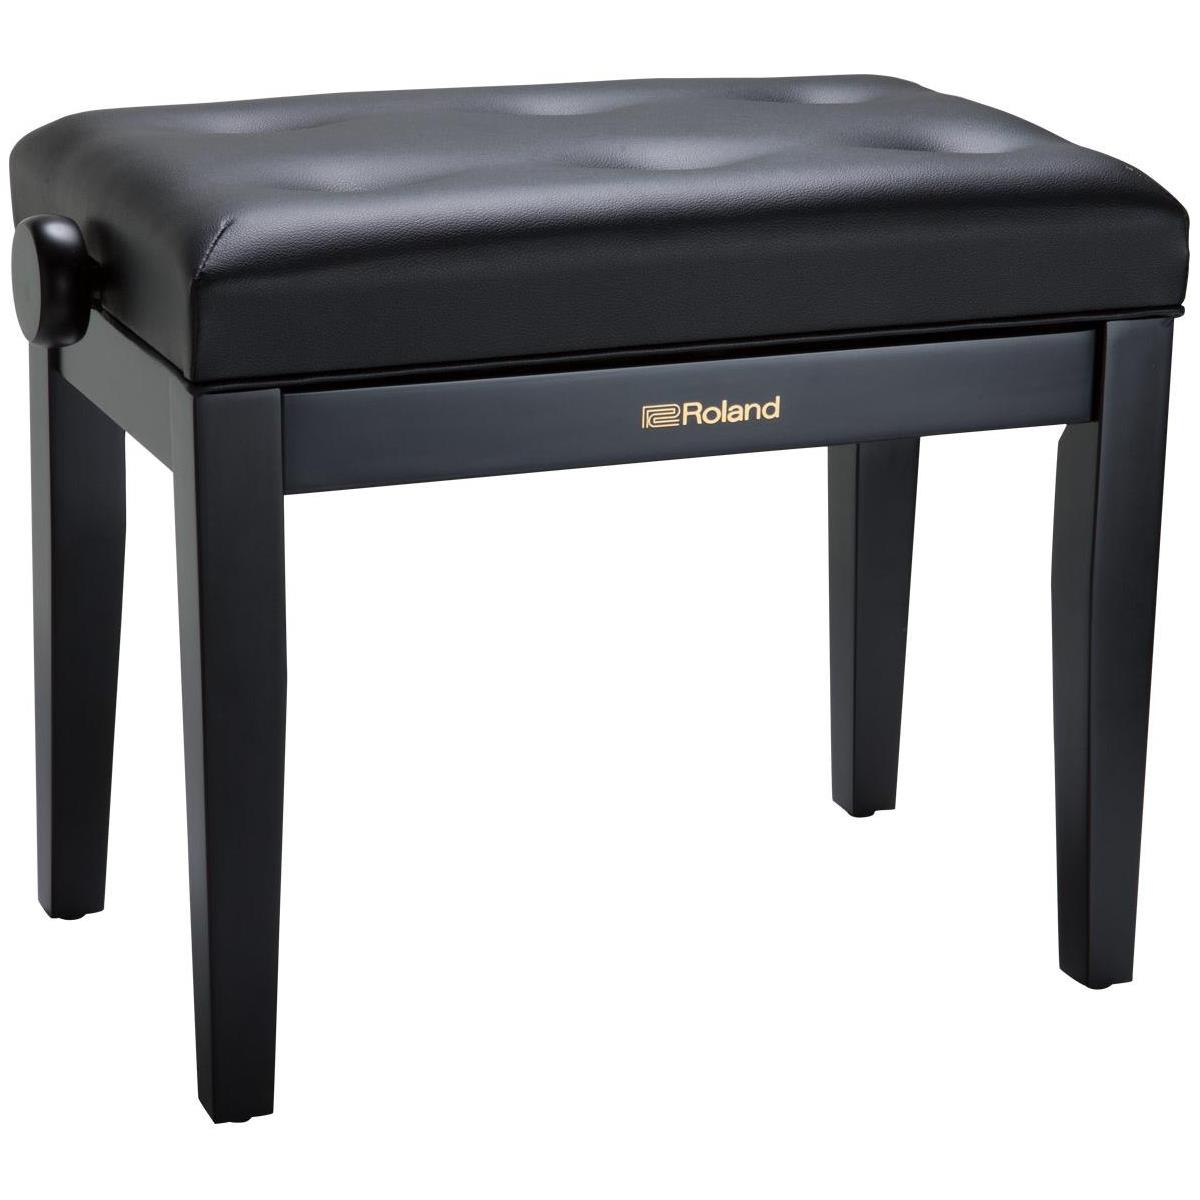 Image of Roland RPB-300 Piano Bench with Cushioned Seat